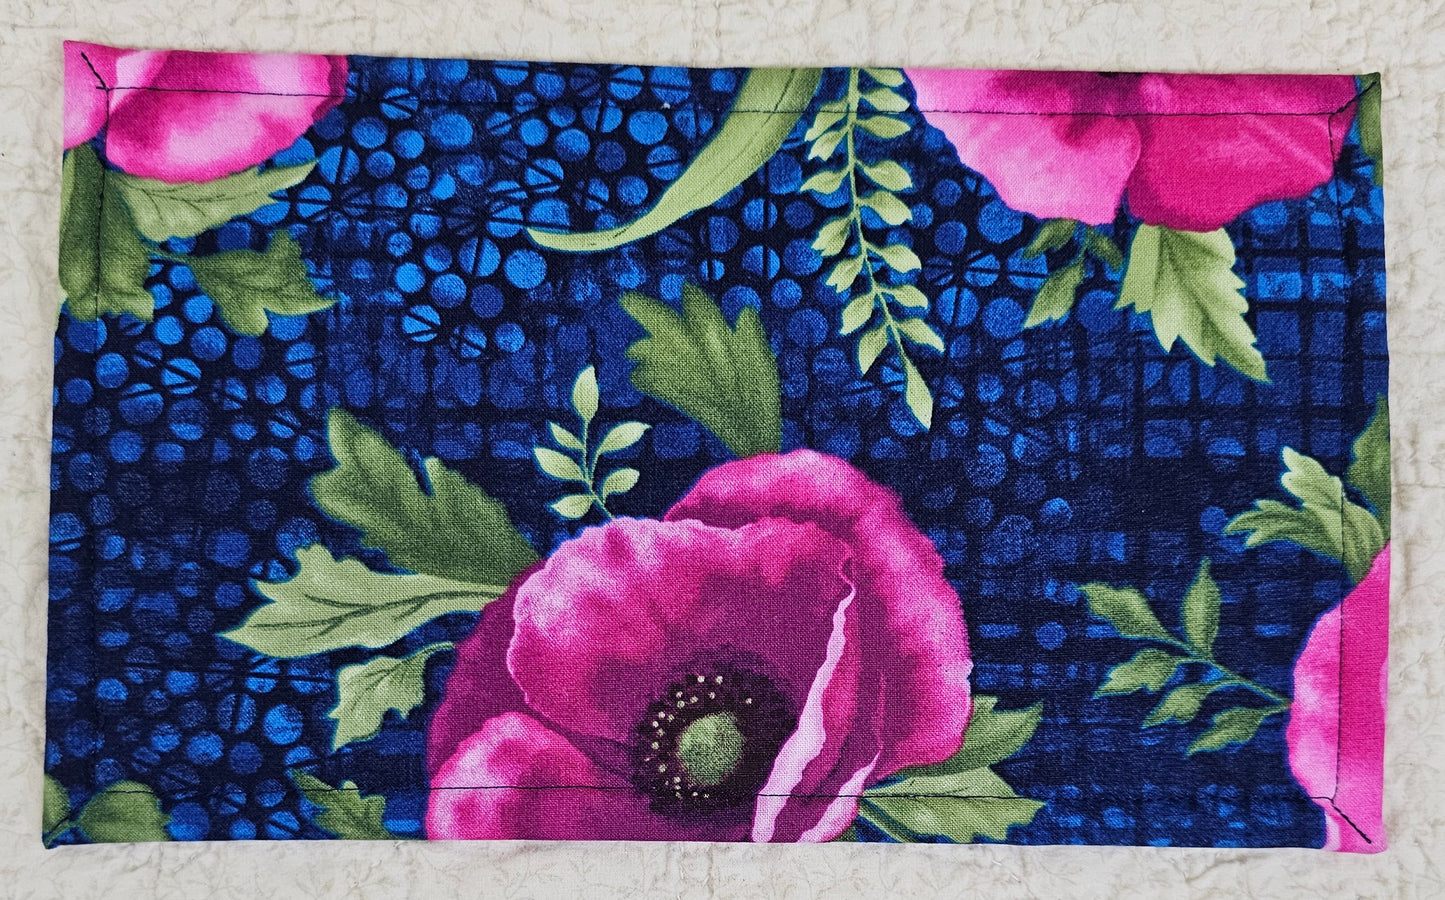 Fuchsia colored flowers - 6.5" x 11" Pouches